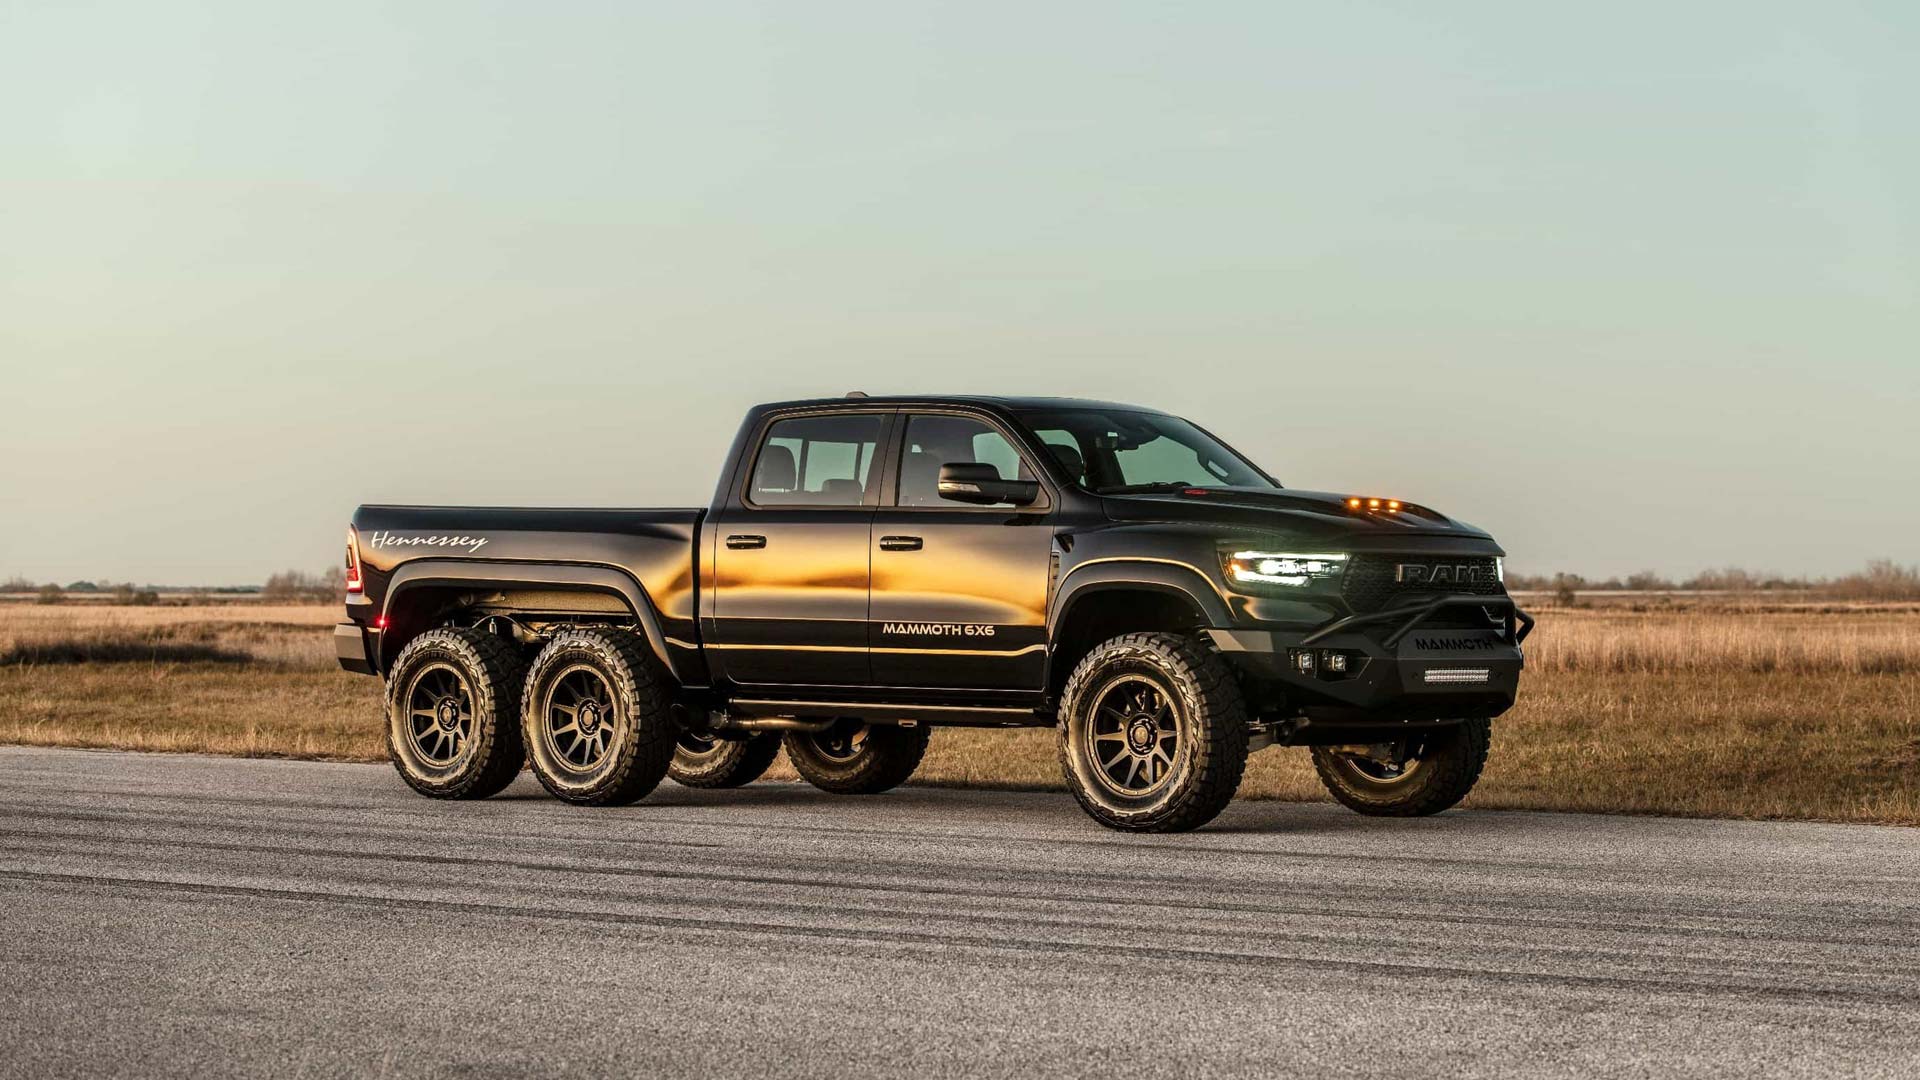 Hennessey Mammoth 1000 6x6 TRX enters production